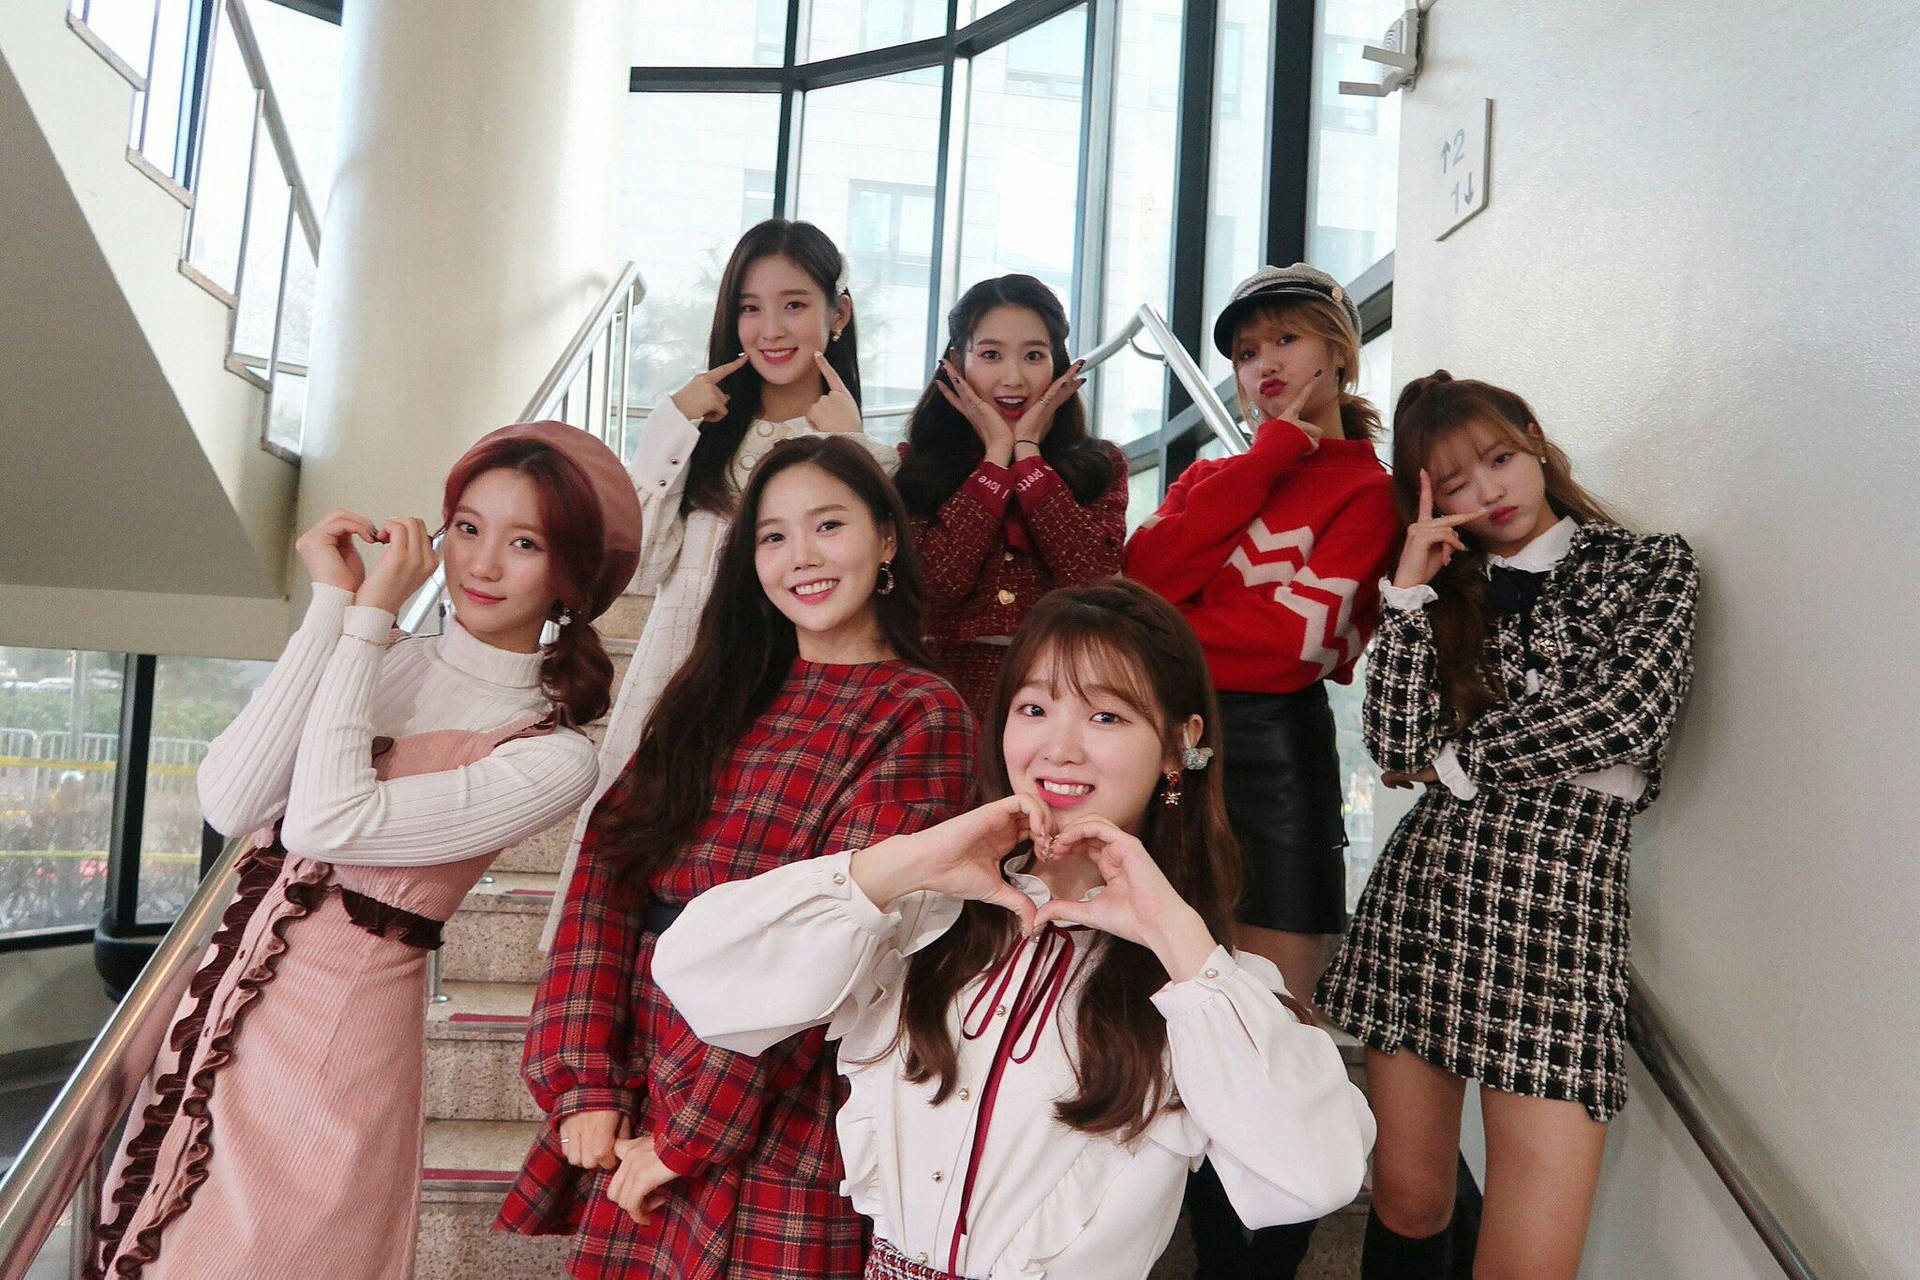 South Korean pop sensation OH MY GIRL in a candid group photo Wallpaper